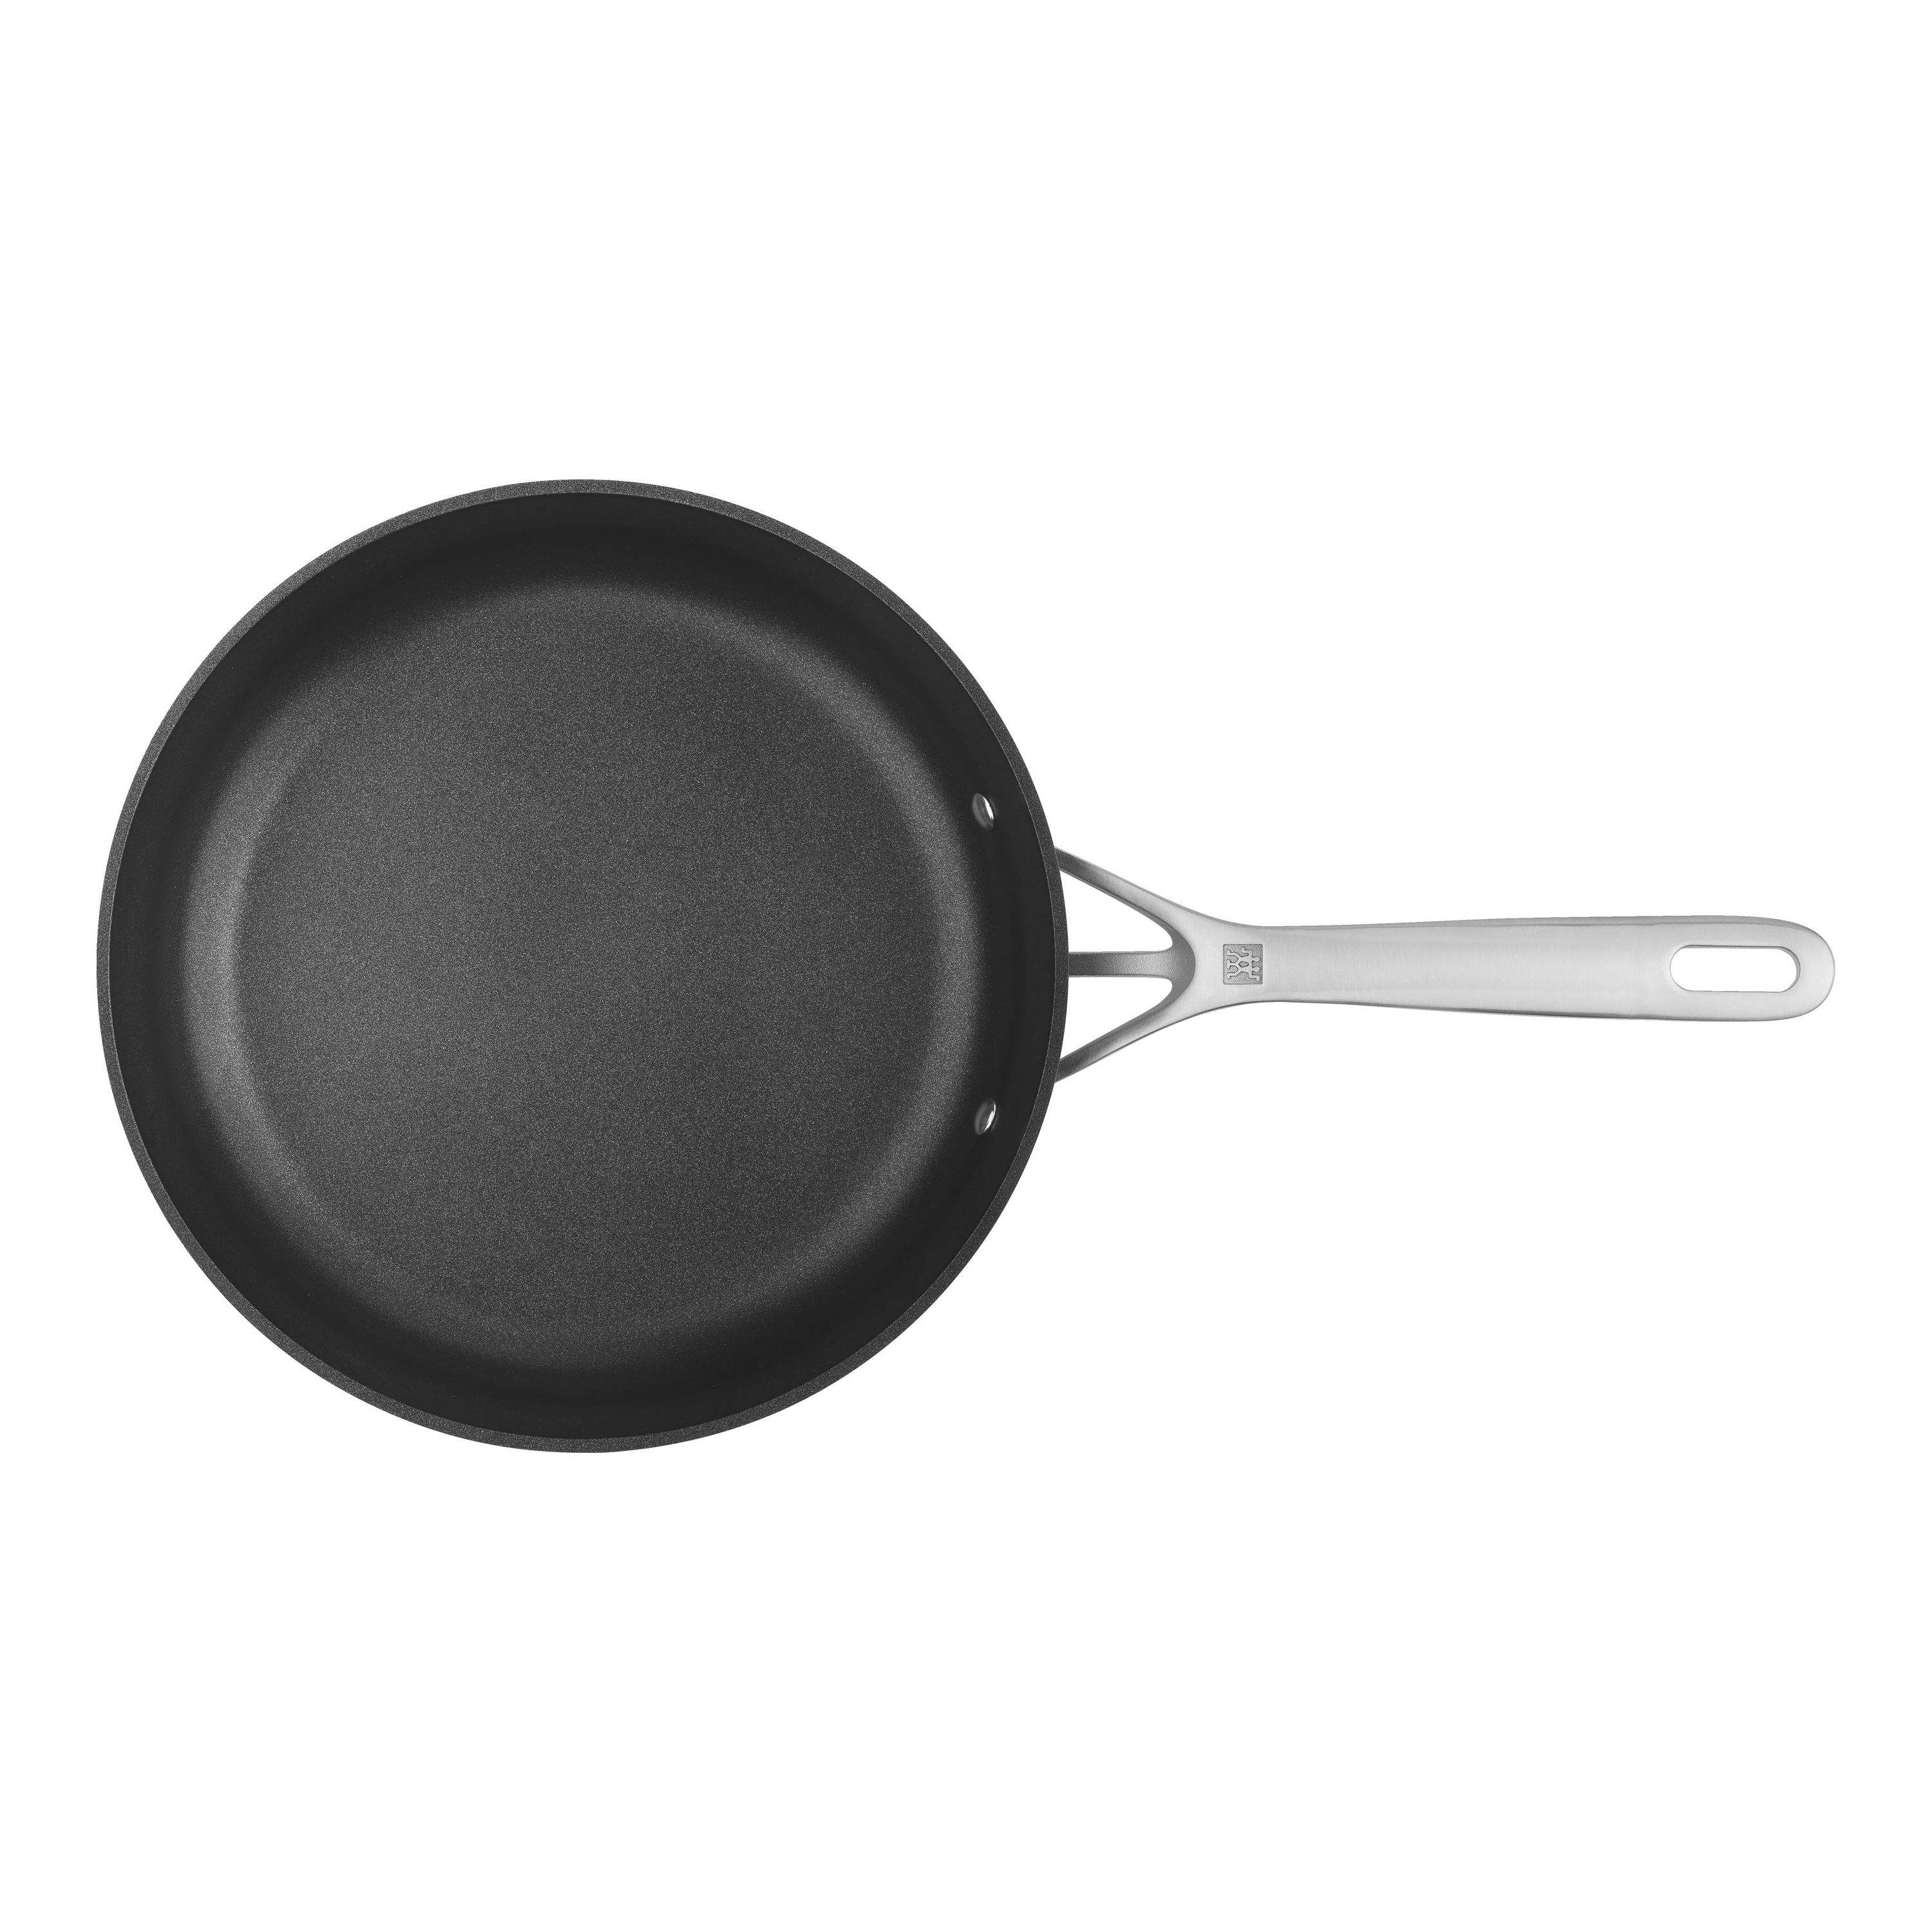 ZWILLING Motion 3-Piece Hard-Anodized Aluminum Frying Pan Set + Reviews